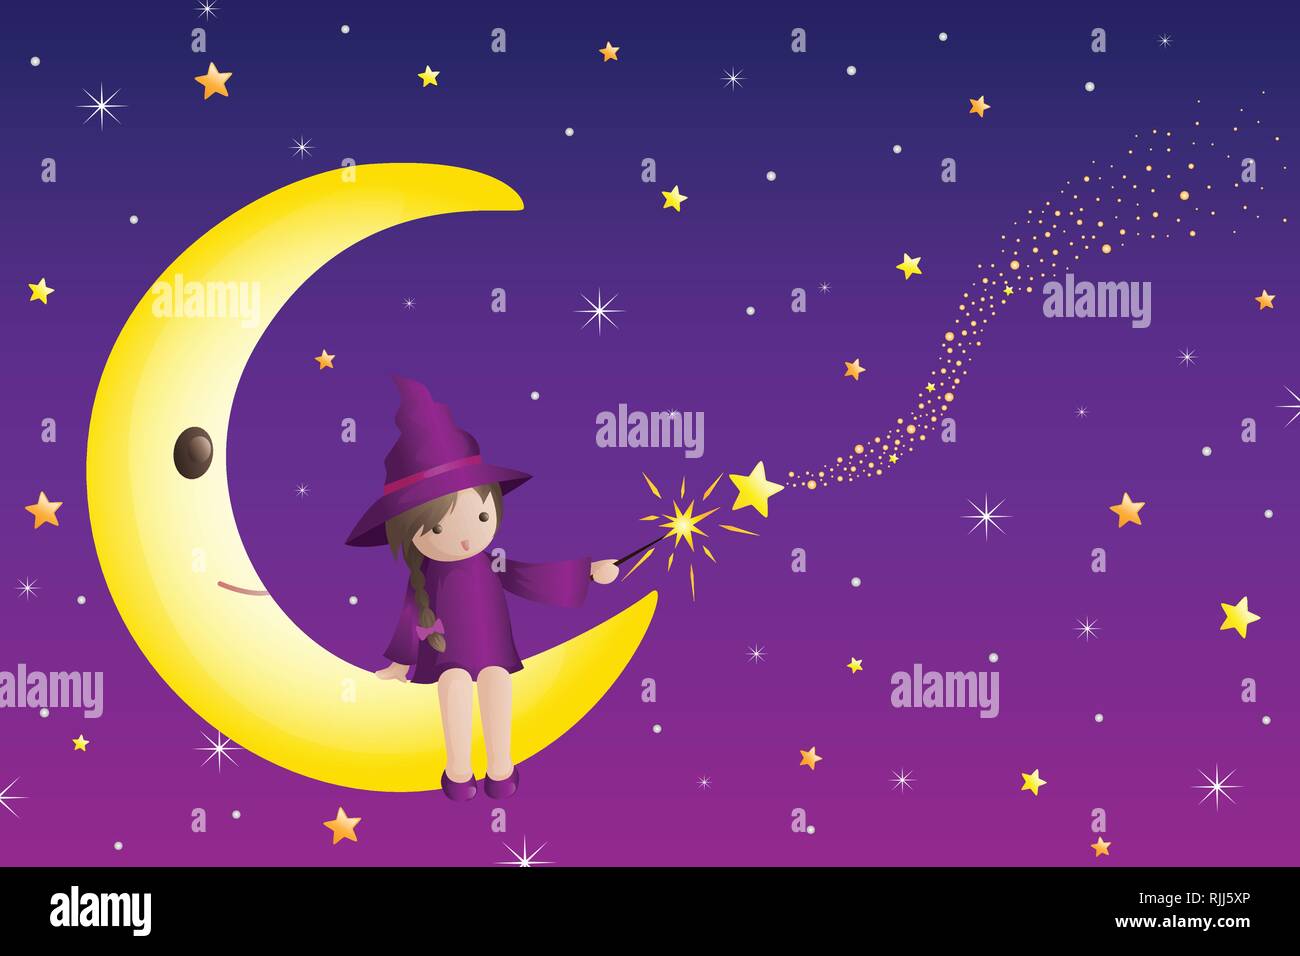 A vector illustration of Little Girl Wizard Sitting on a Half Moon Stock Vector